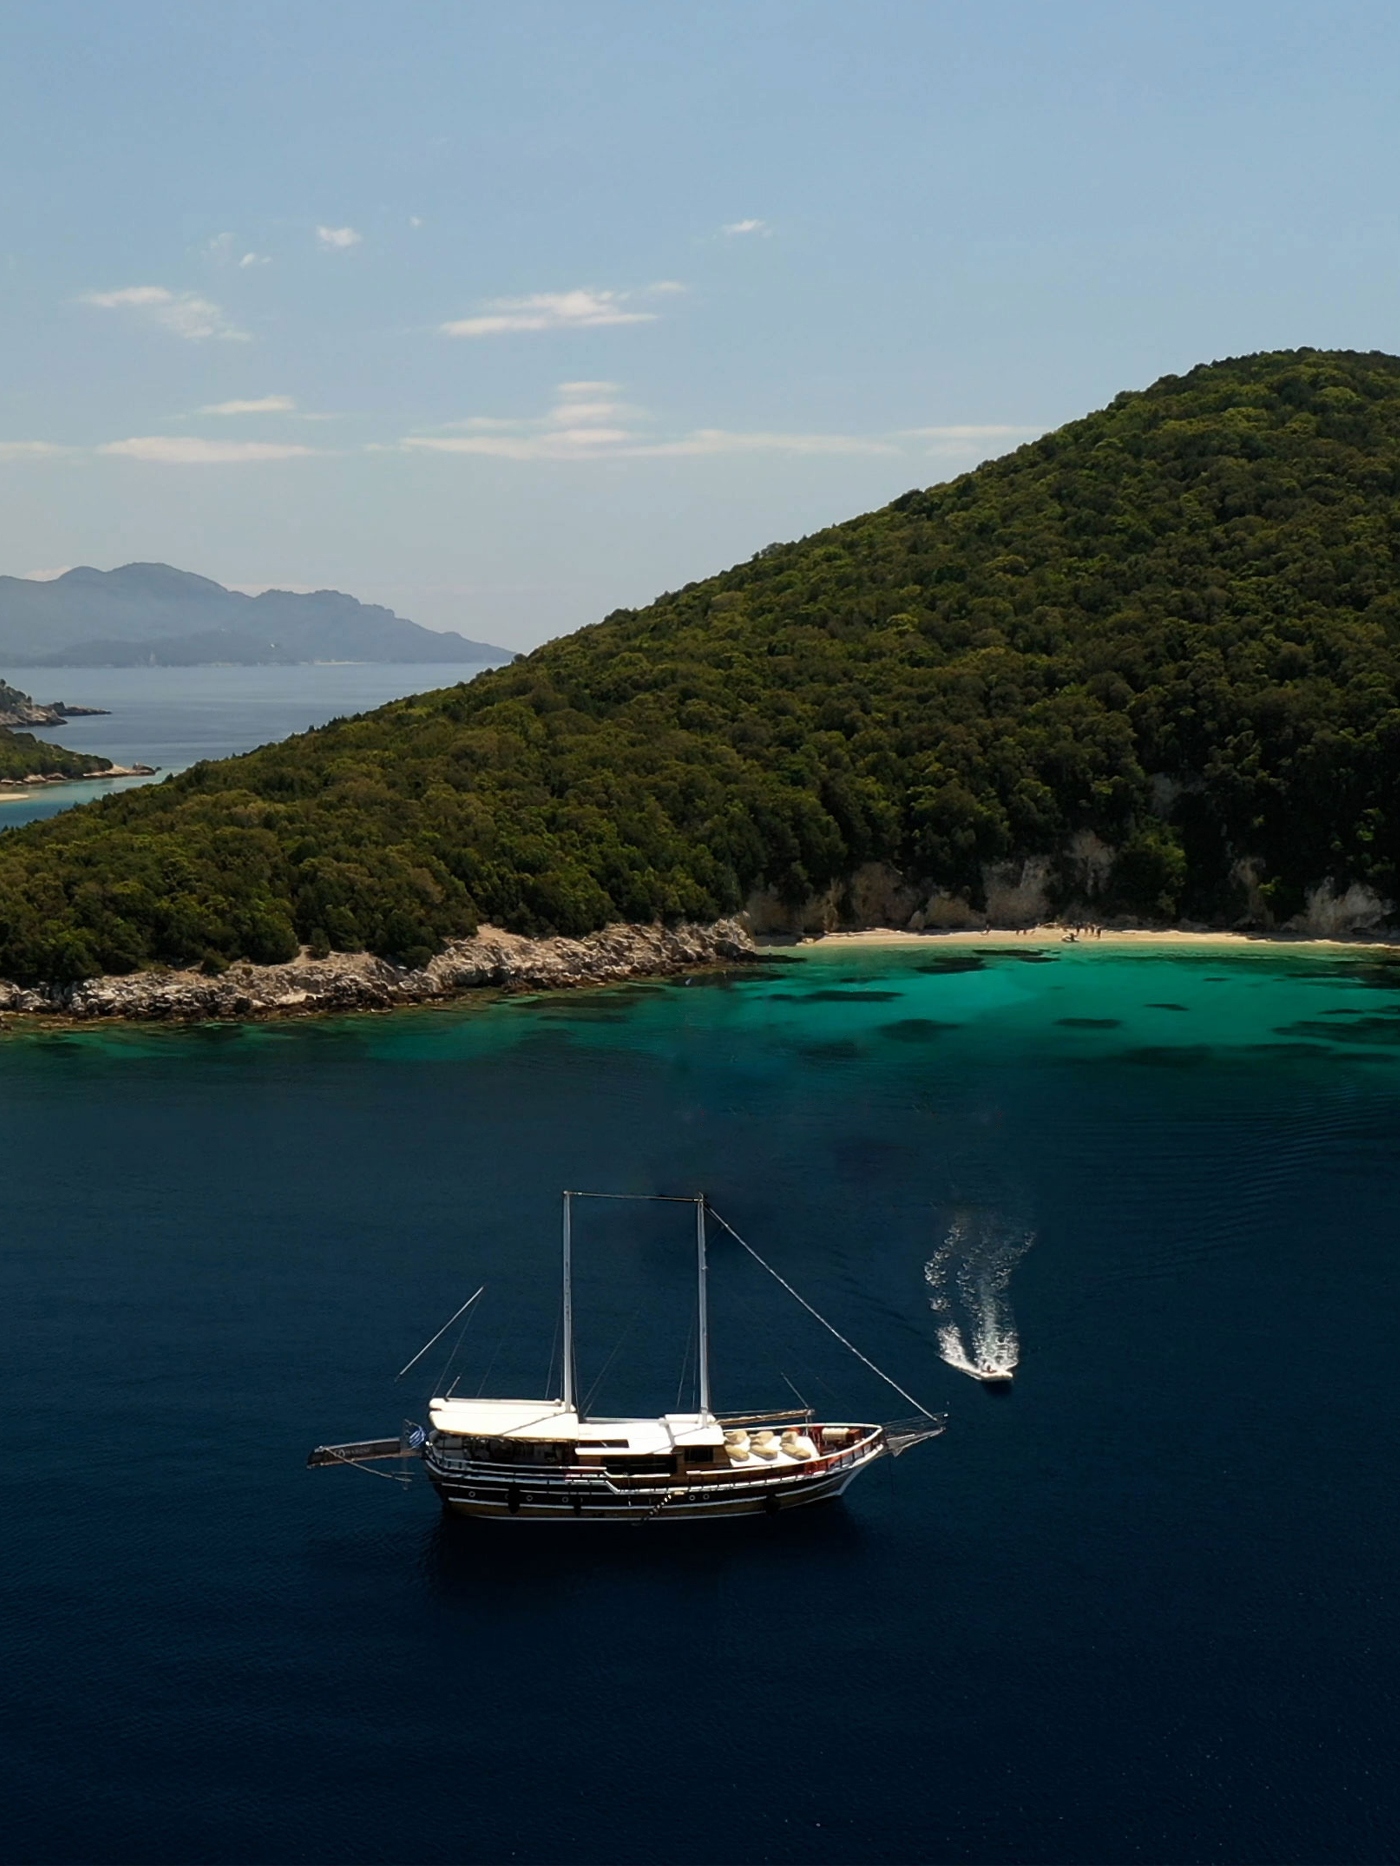 Island hopping in Greece. The ultimate wellbeing holiday. 2